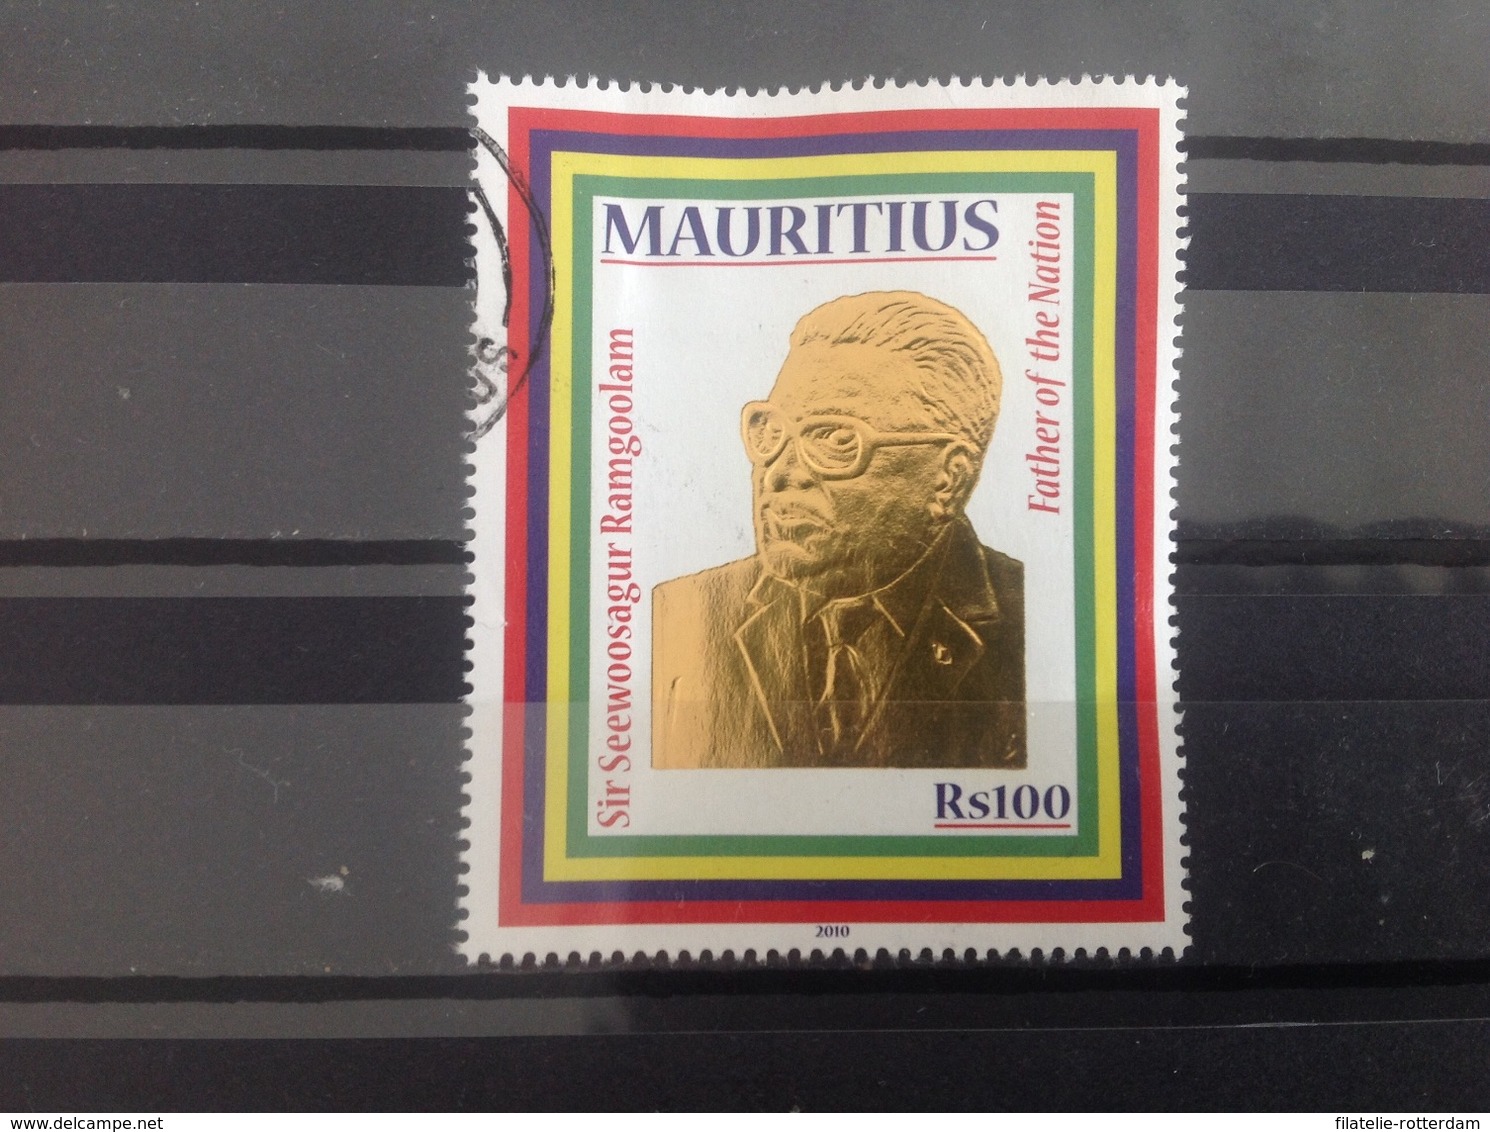 Mauritius / Maurice - Father Of The Nation (100) 2010 High Value! - Mauritius (1968-...)